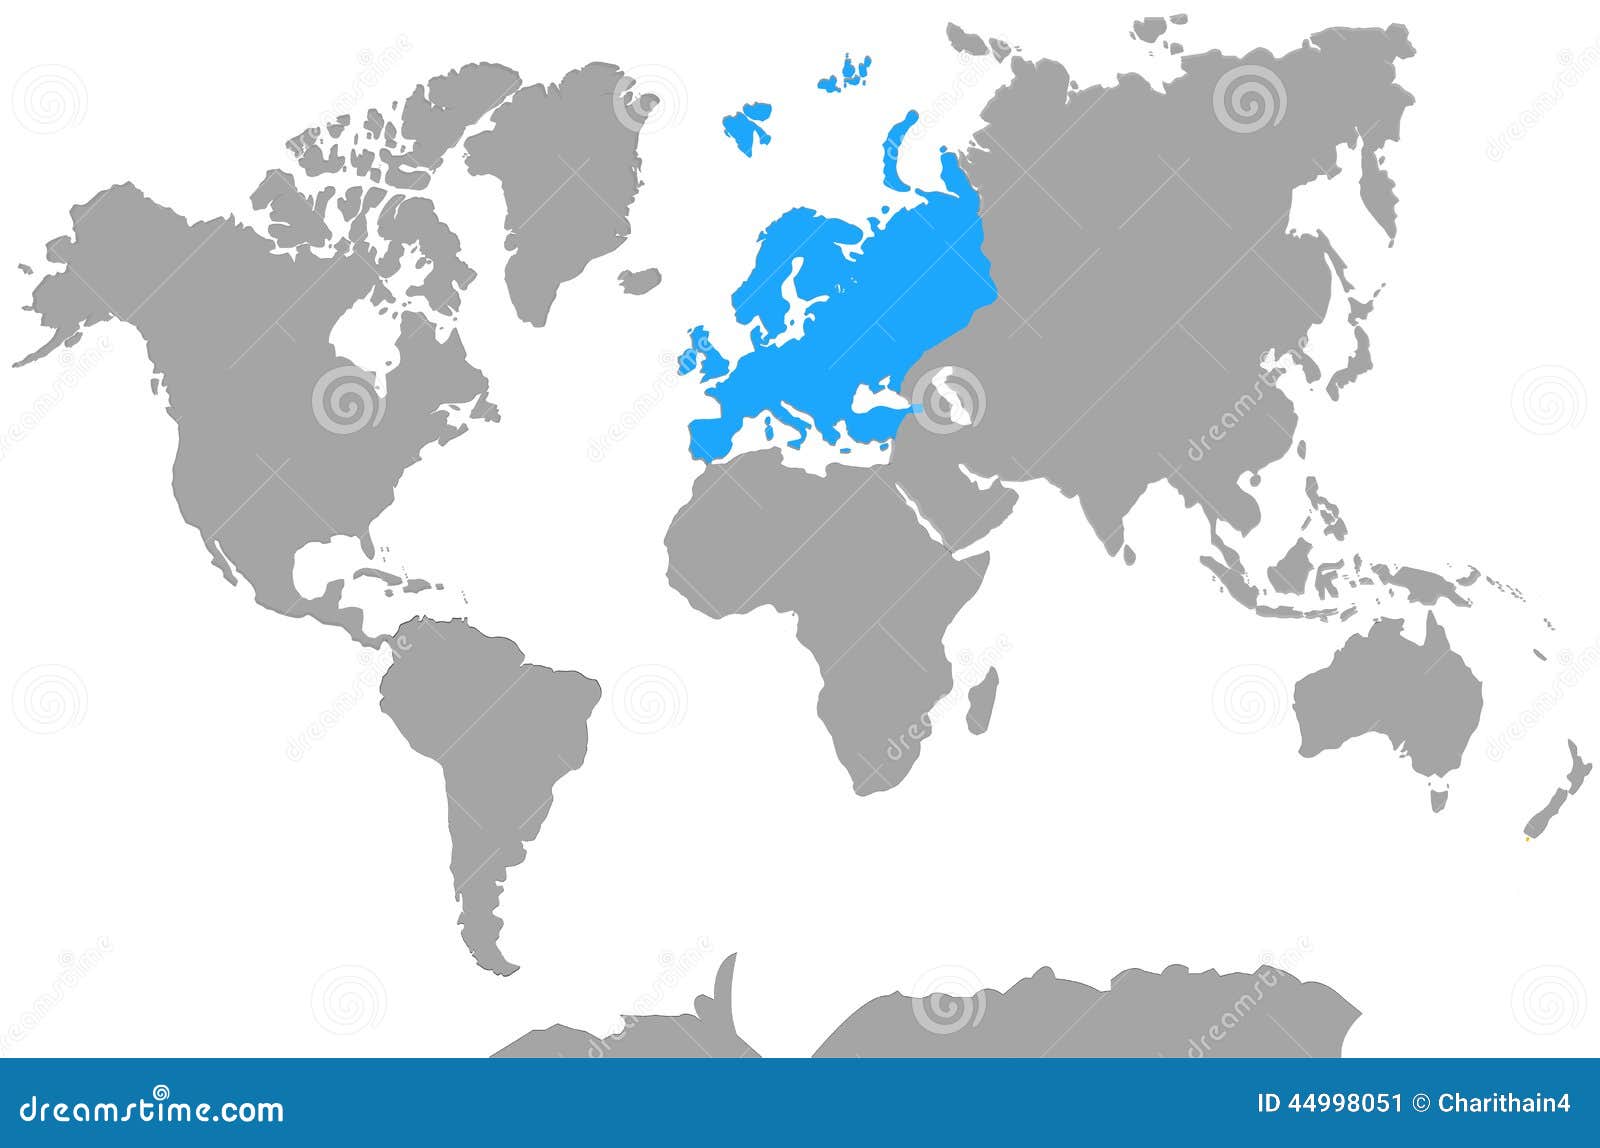 Highlight Of Europe From Continents World Map Stock Illustration 